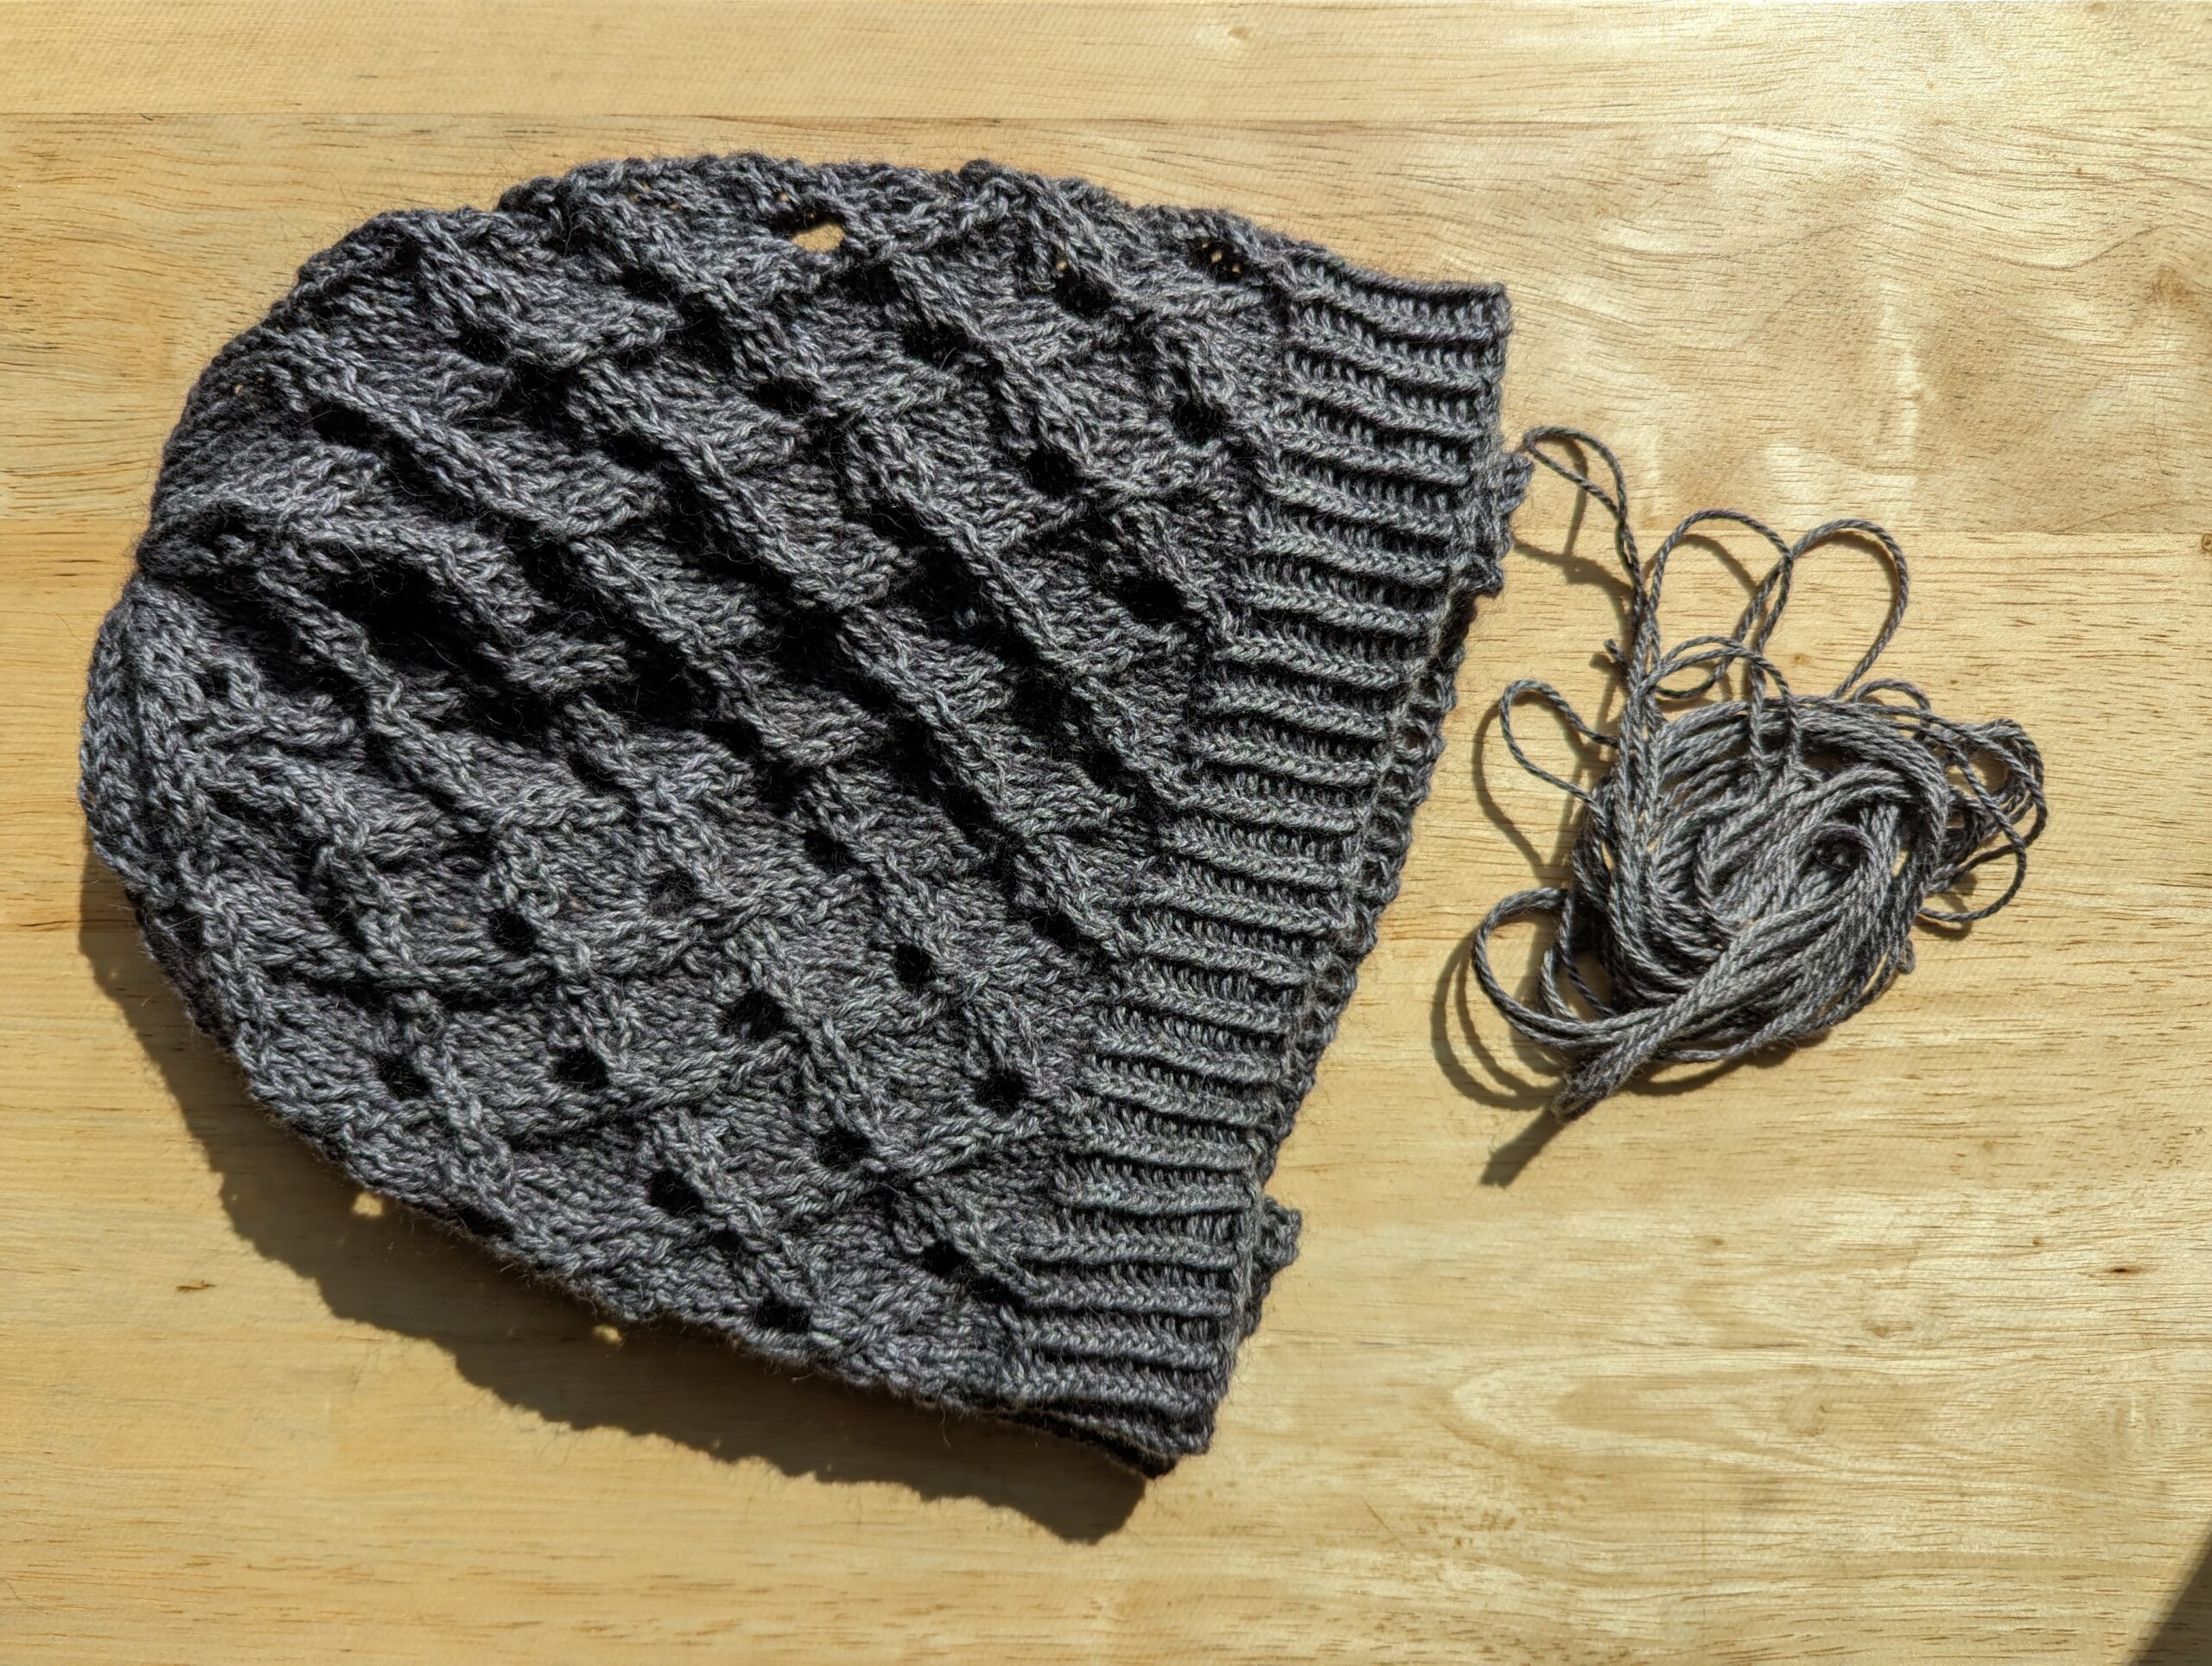 A folded slouchey beret with cables around syncopated holes atop a twist knit band next to some leftover purplish grey yarn